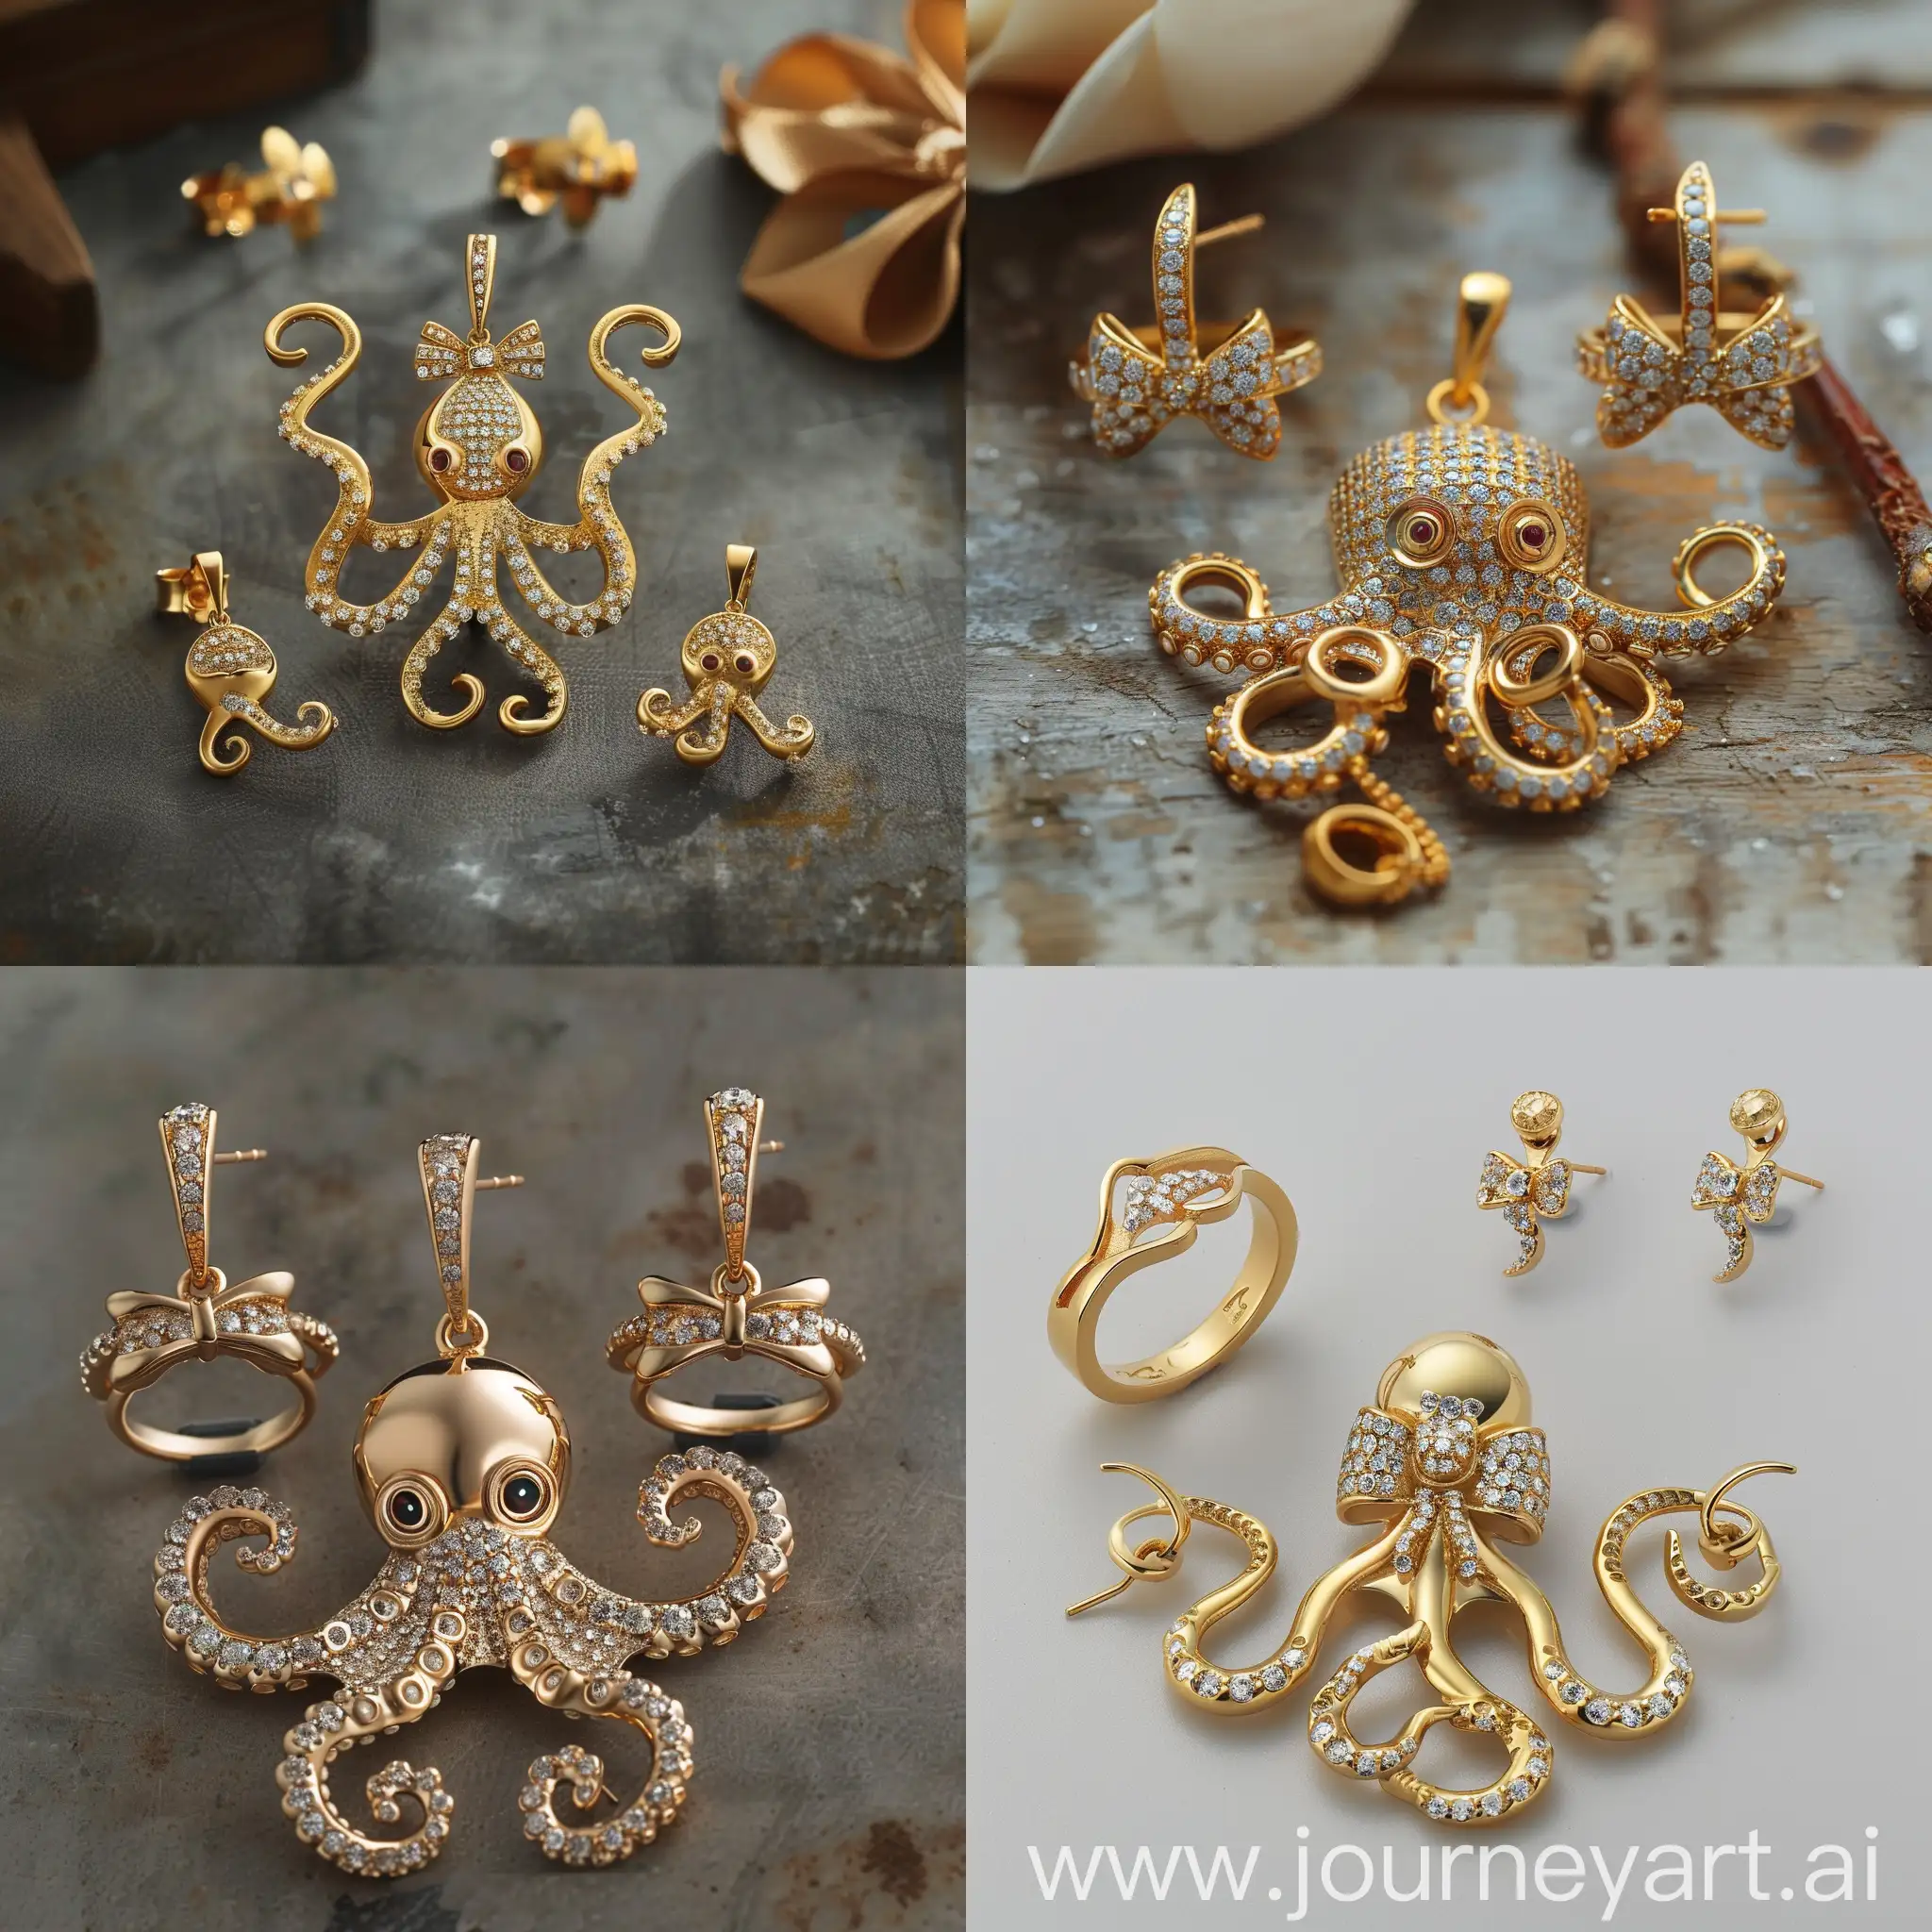 Exquisite-OctopusShaped-Gold-Jewelry-Collection-with-Jewel-Adornments-and-Bow-Detail